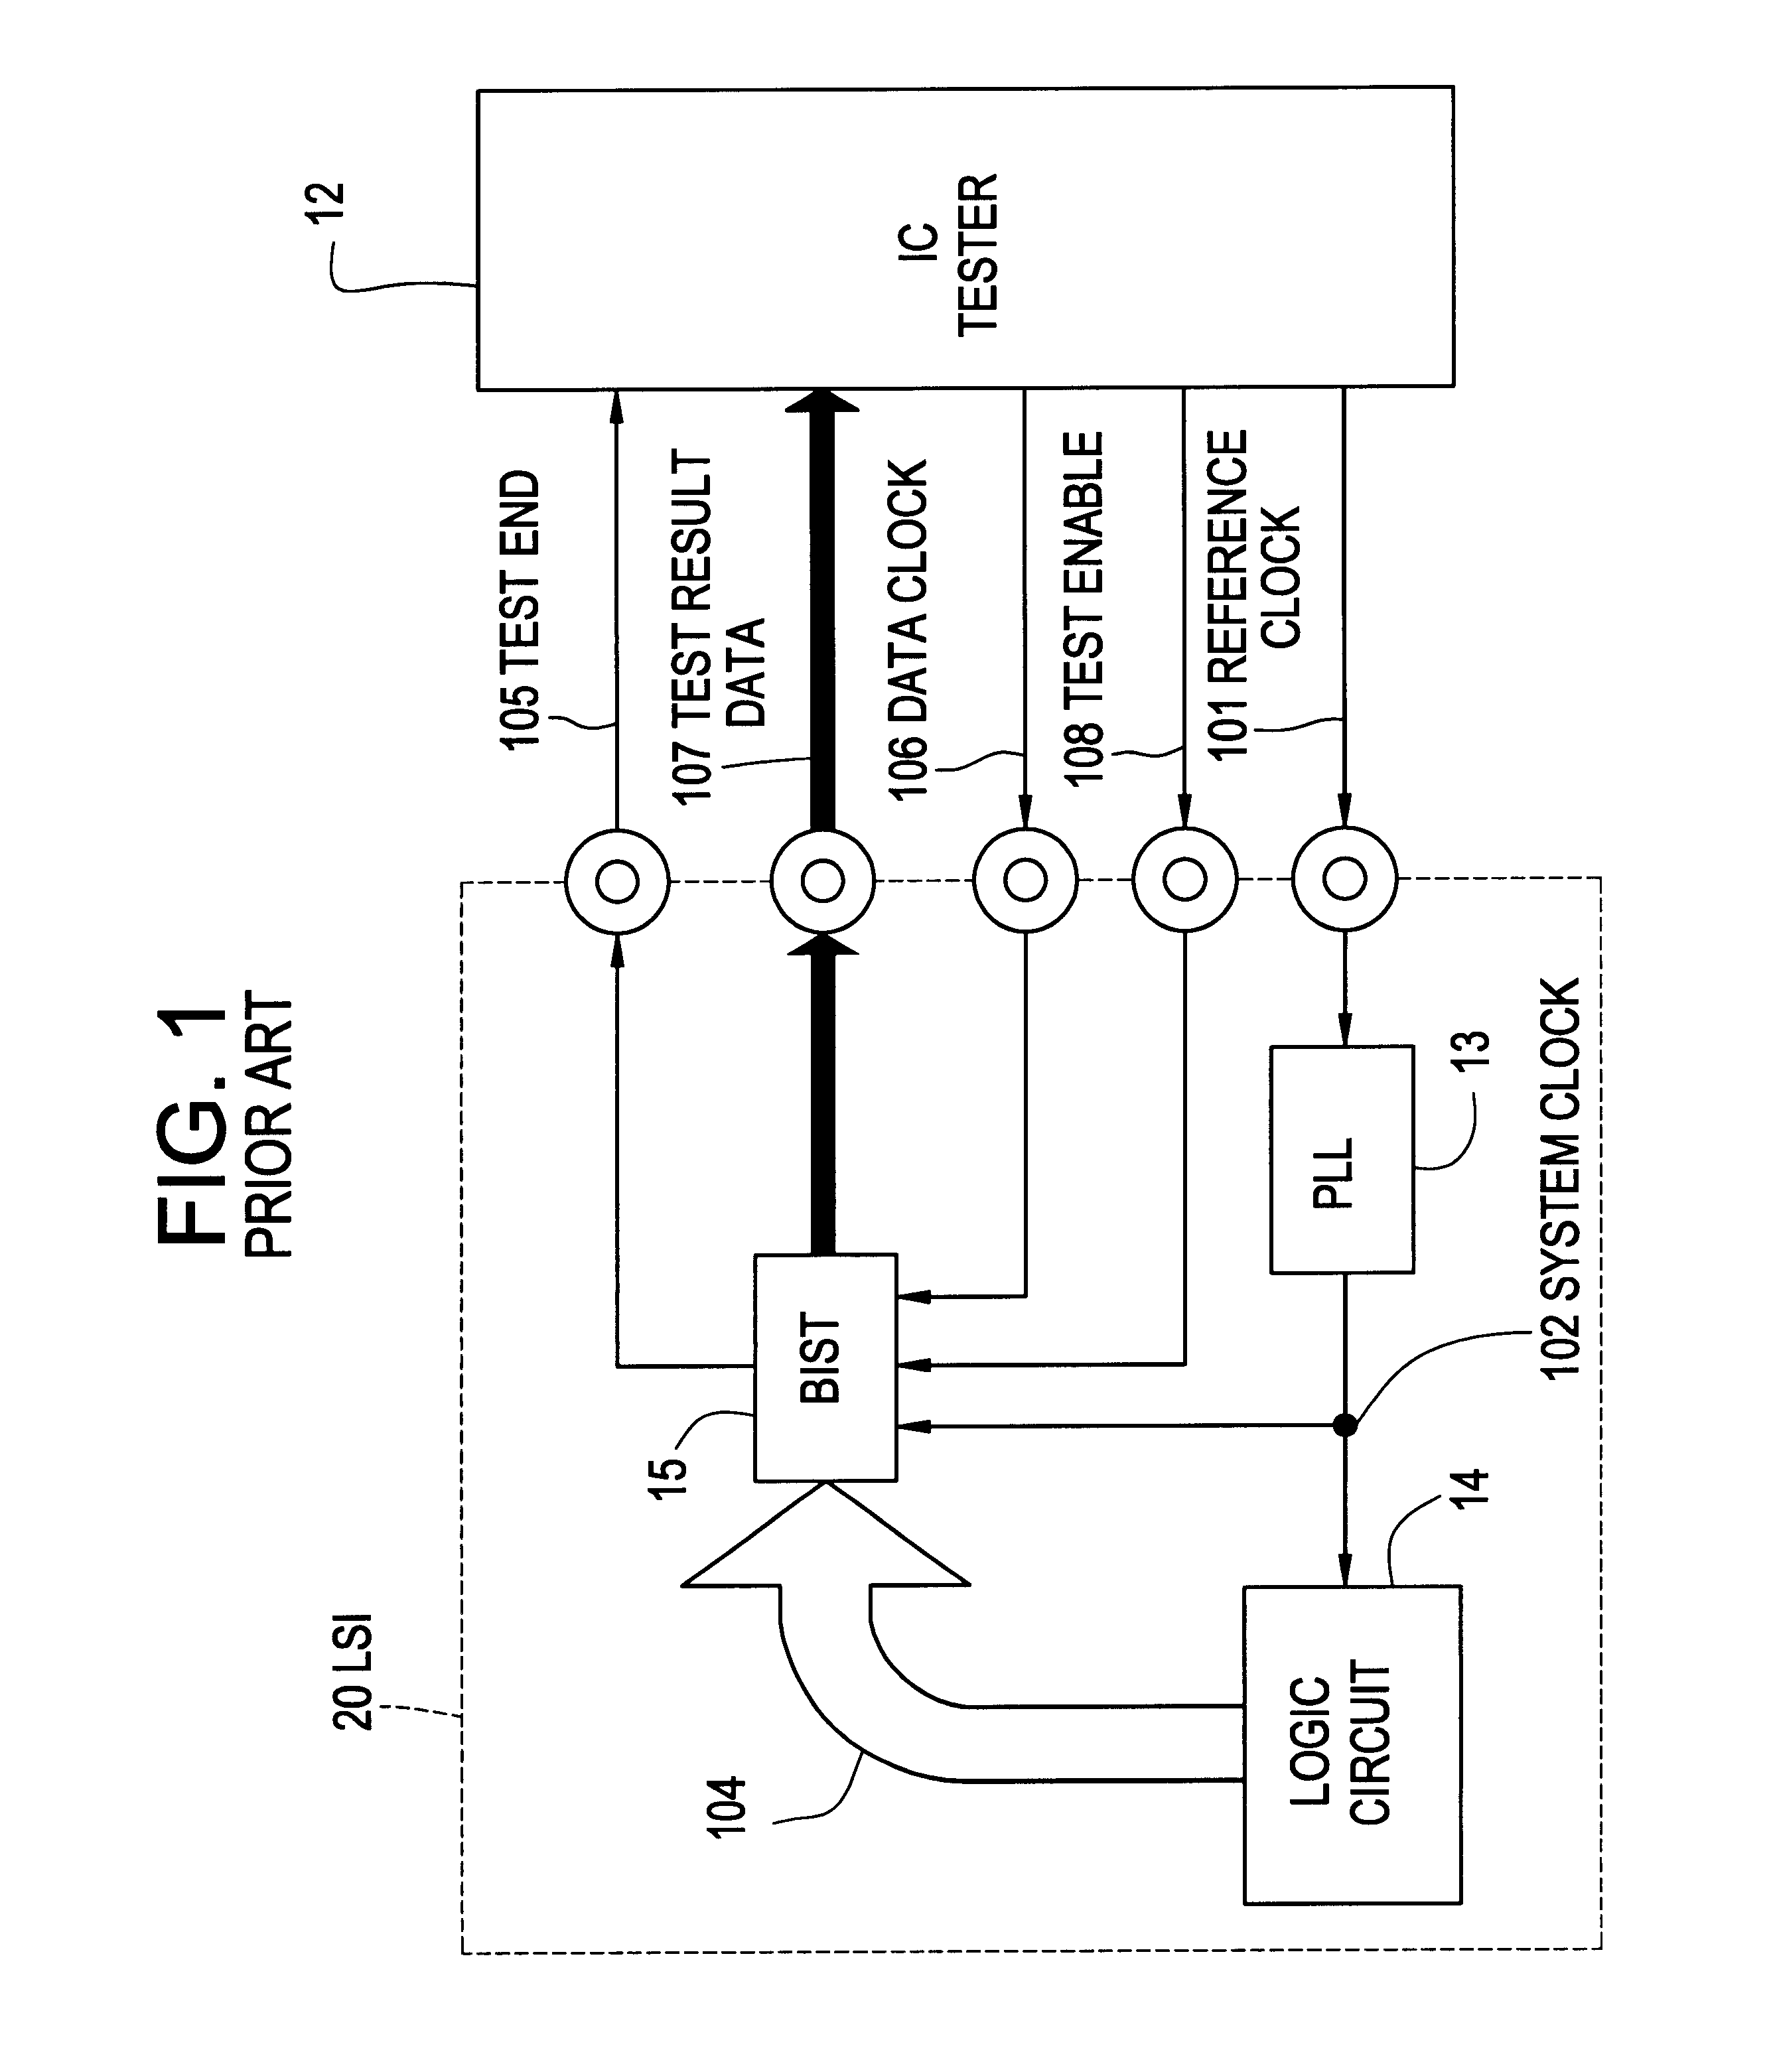 LSI having a built-in self-test circuit